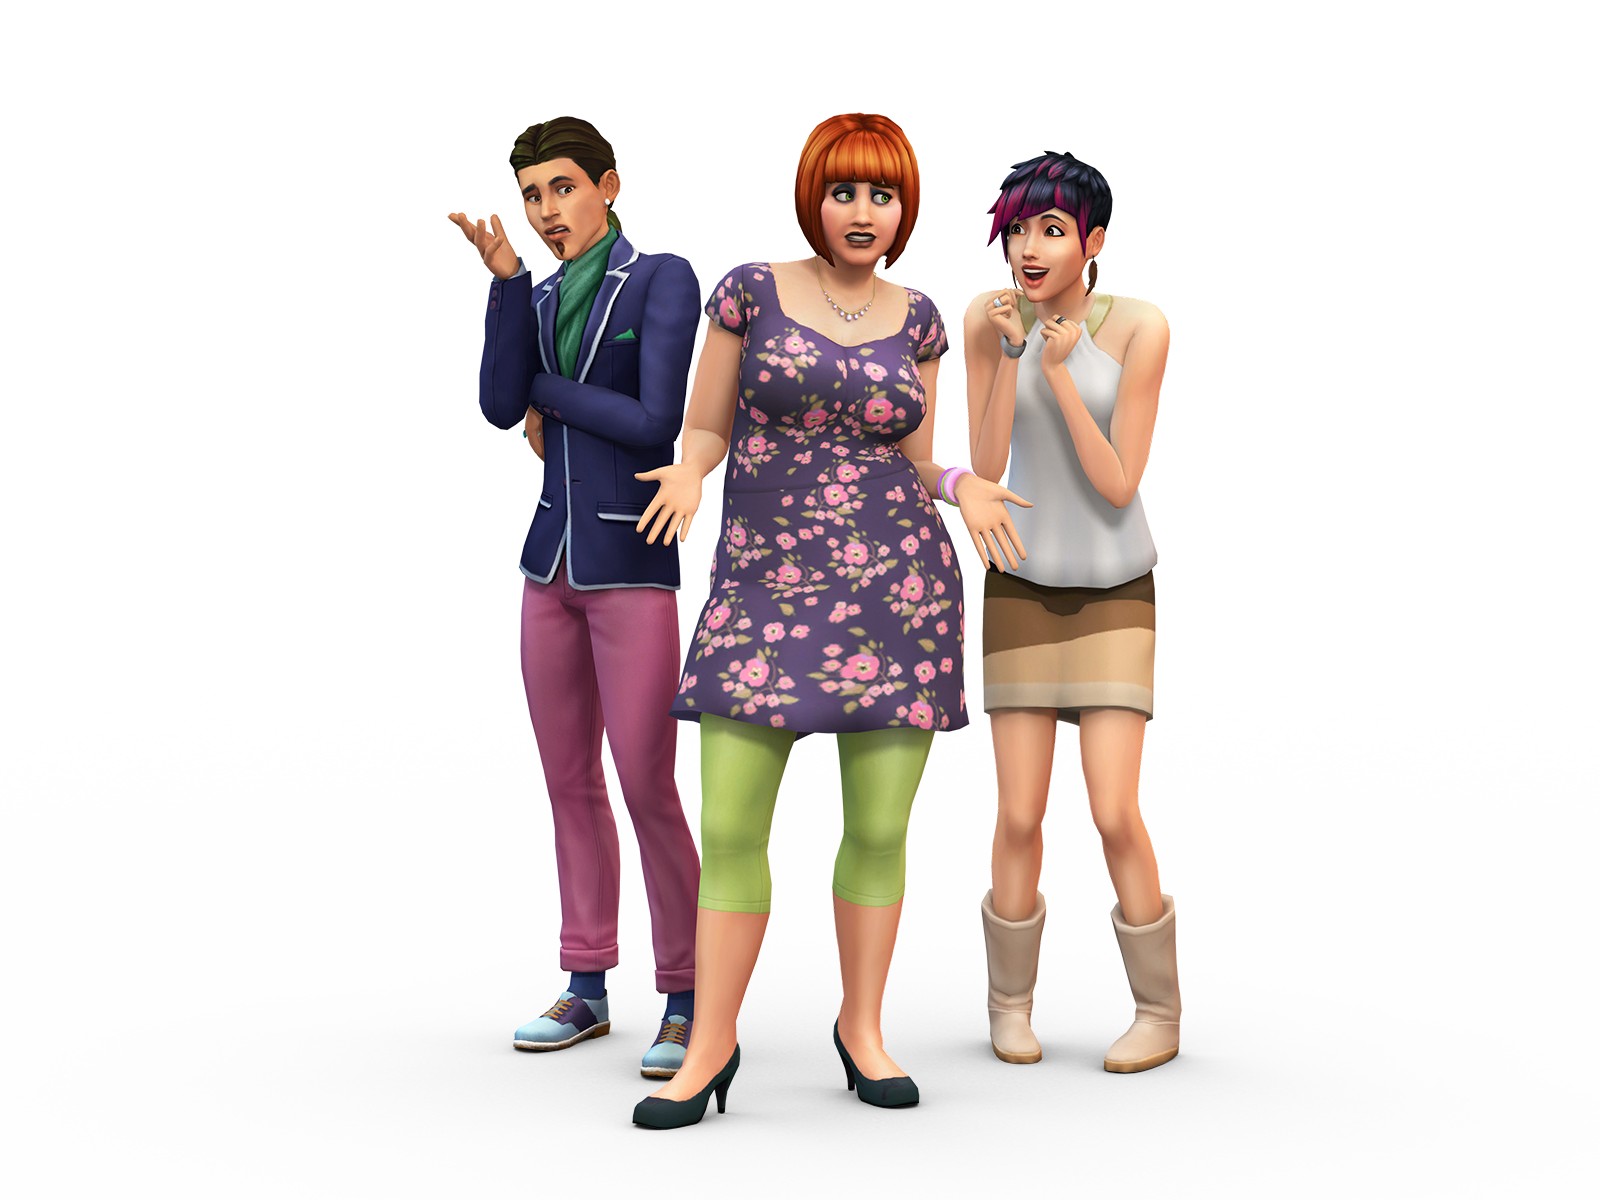 The Sims 4: Updated EA Press Kit | SimsVIP